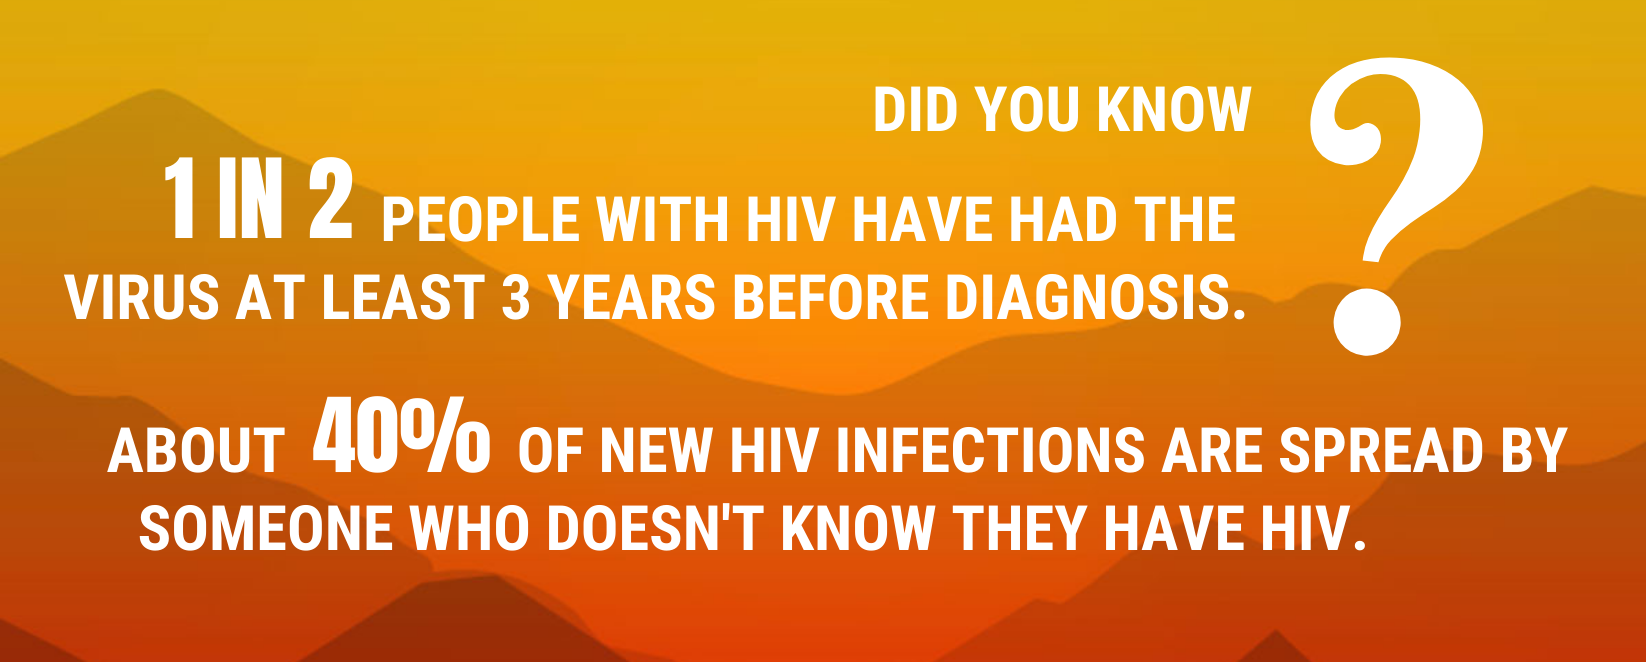 1 in 2 people with HIV have had the virus at least 3 years before diagnosis. About 40% of new infections are spread by someone who doesn't know they have it. 